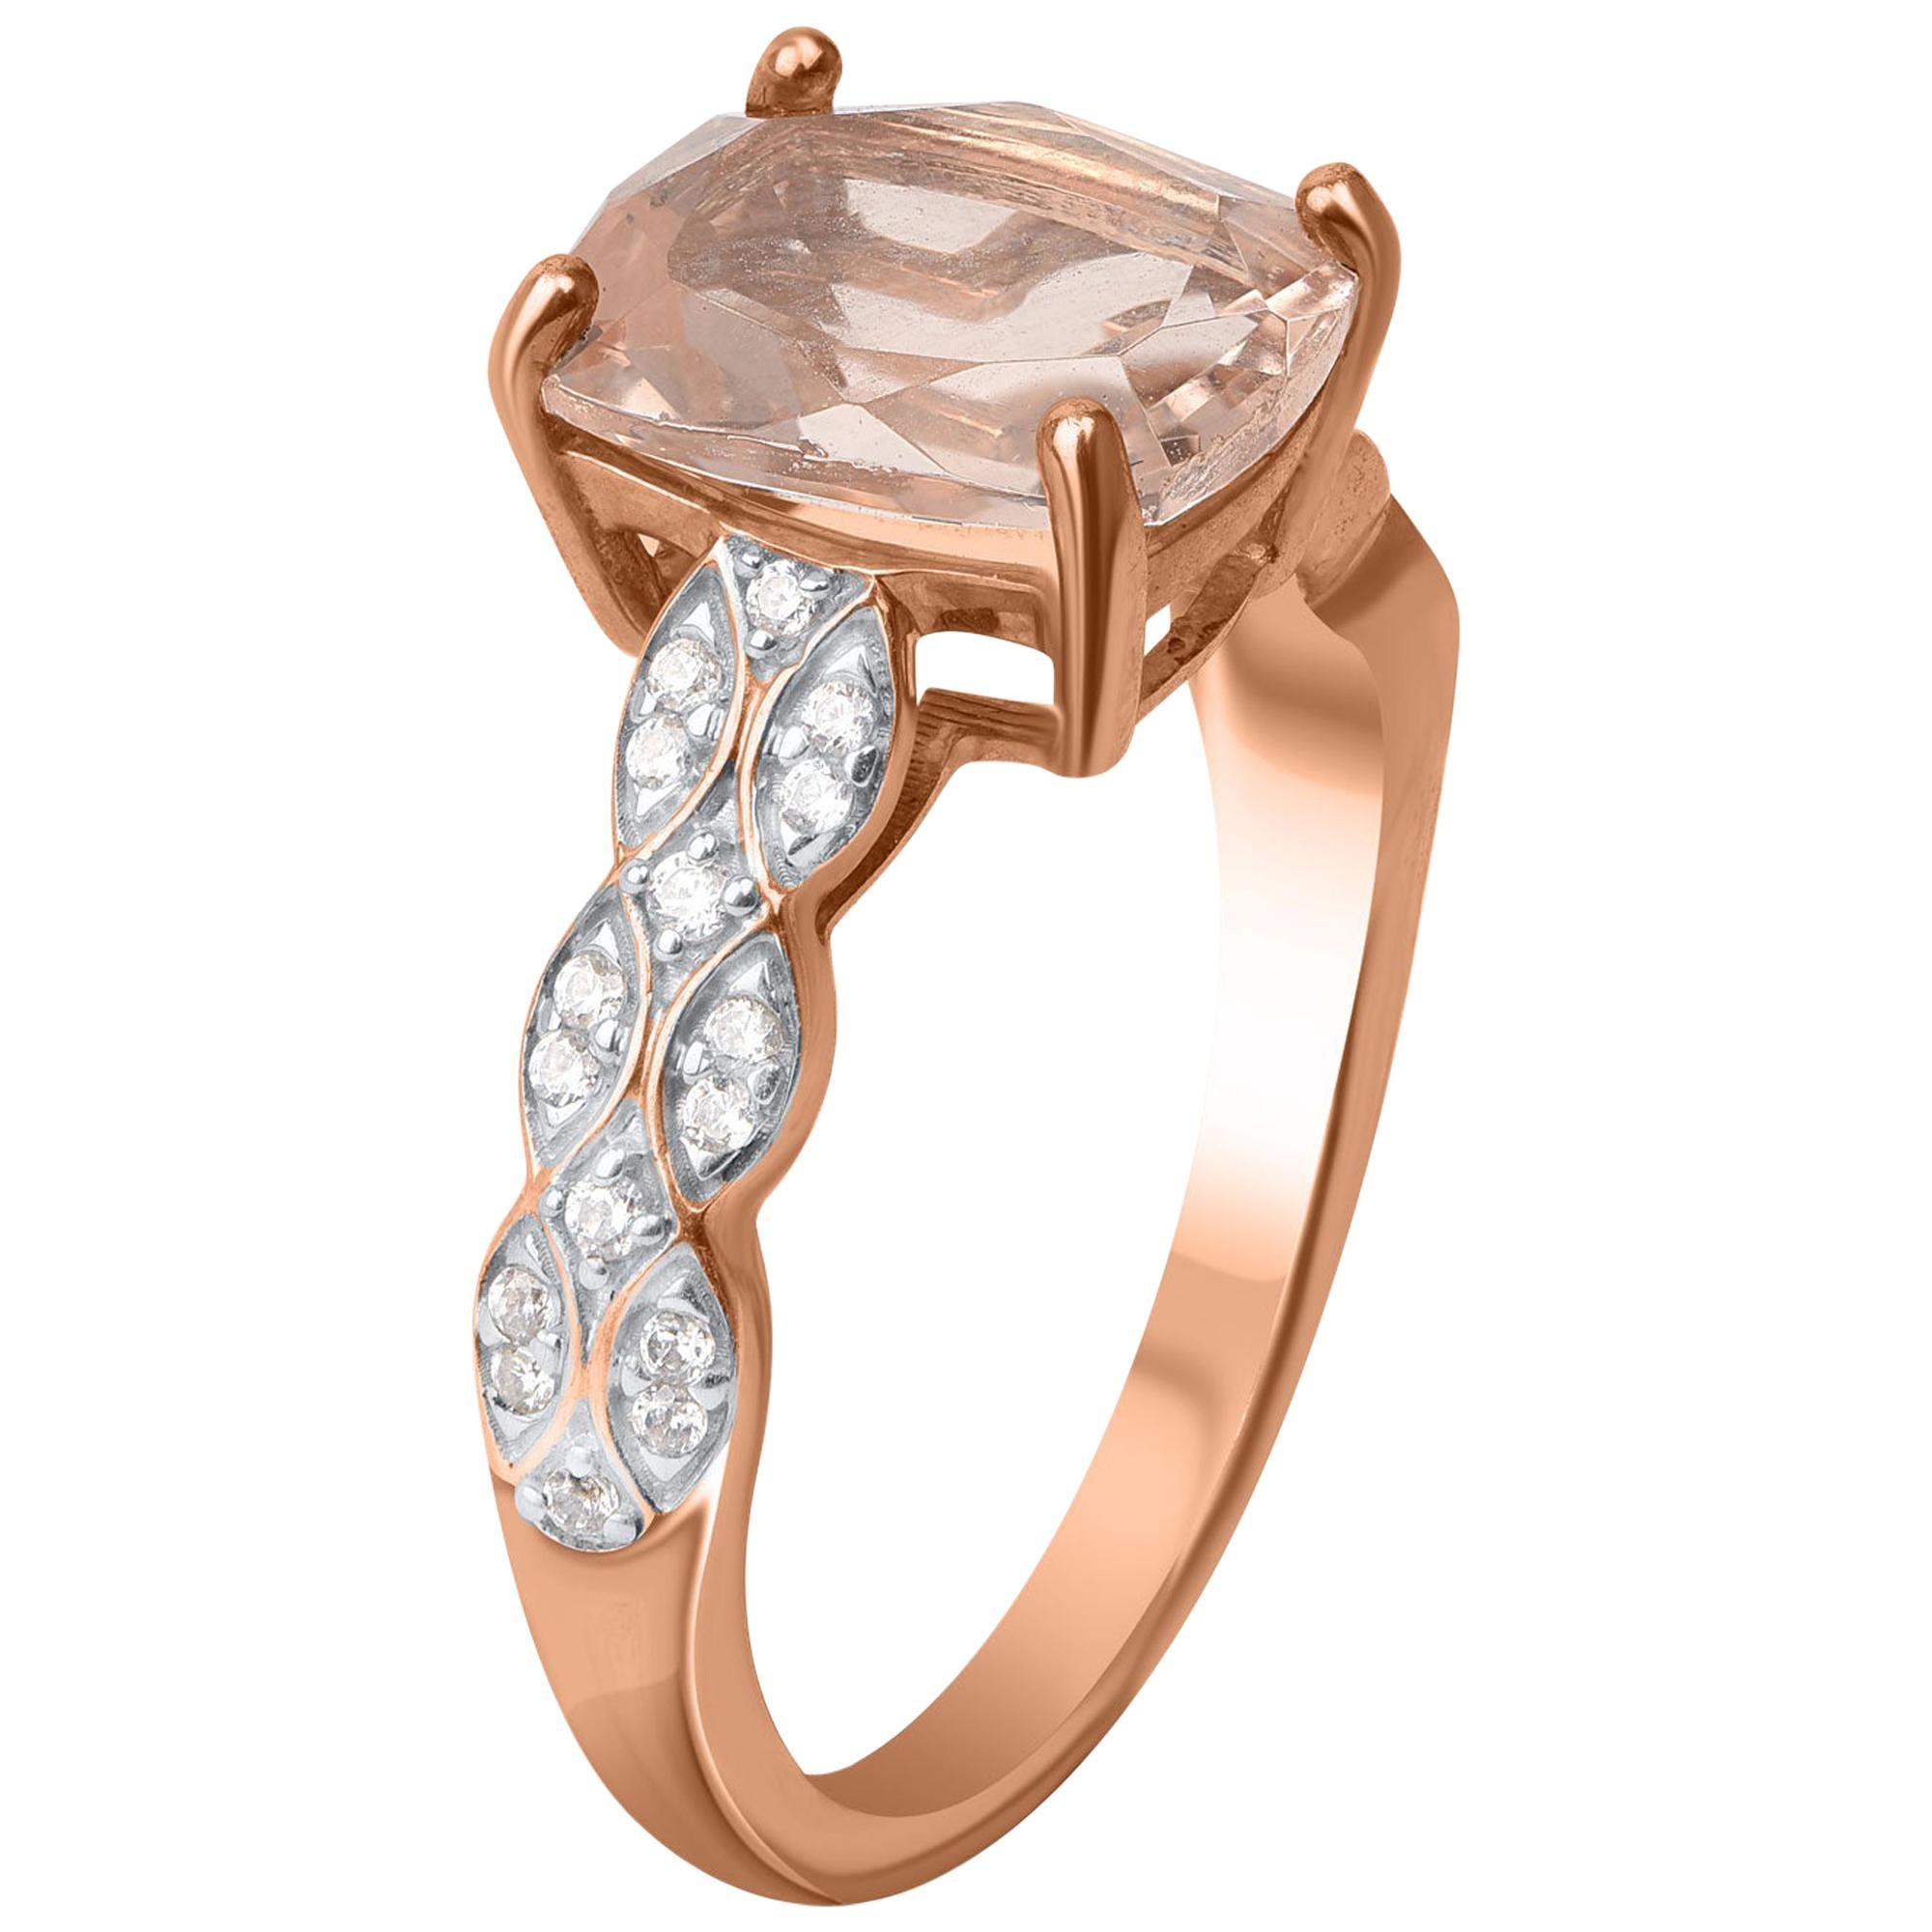 The ring is crafted in 14 KT rose gold and studded with 32 natural brilliant diamonds and 1 natural morganite in pave and prong setting. Diamonds are graded HI color, I2 clarity. 
This comfort fit diamond and natural morganite is a unique choice for